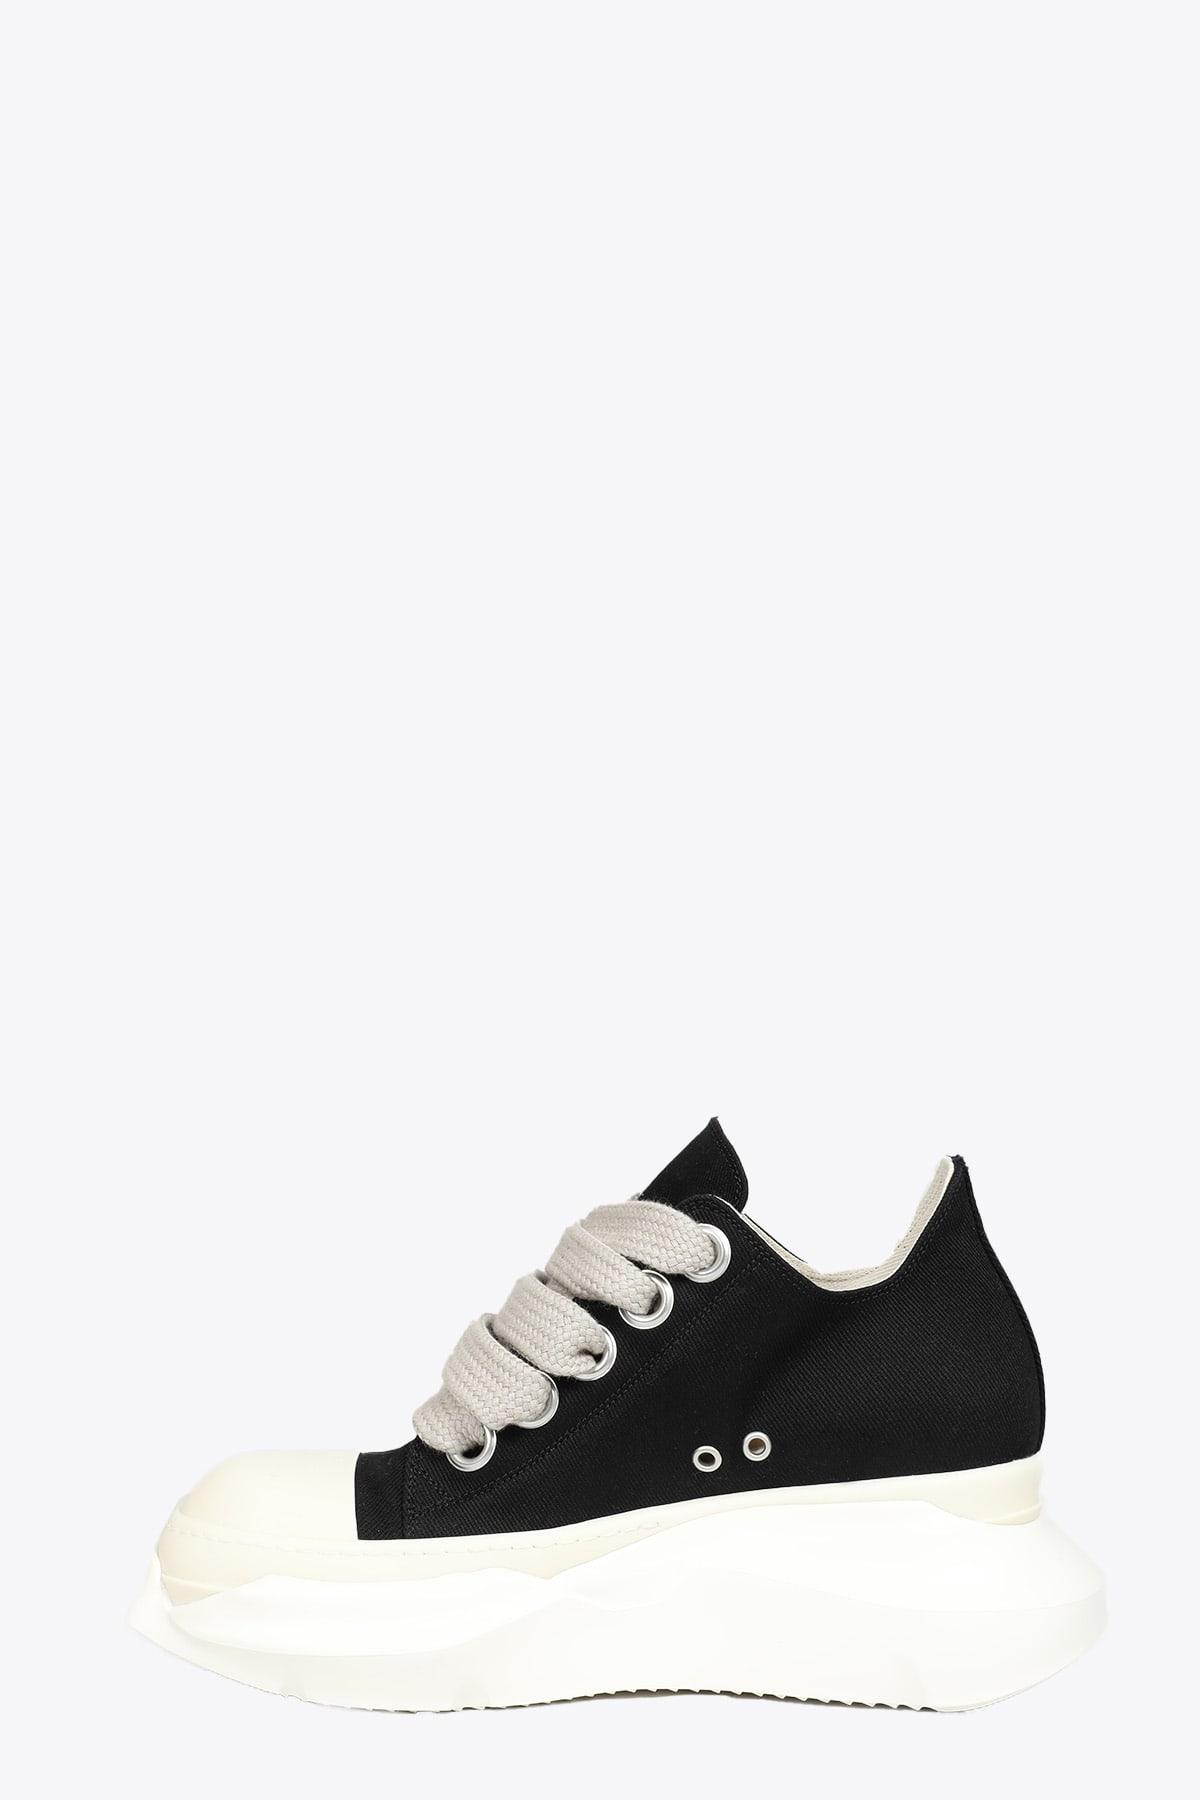 Rick Owens DRKSHDW Abstract Low Black Denim Low Abstract Sneaker 